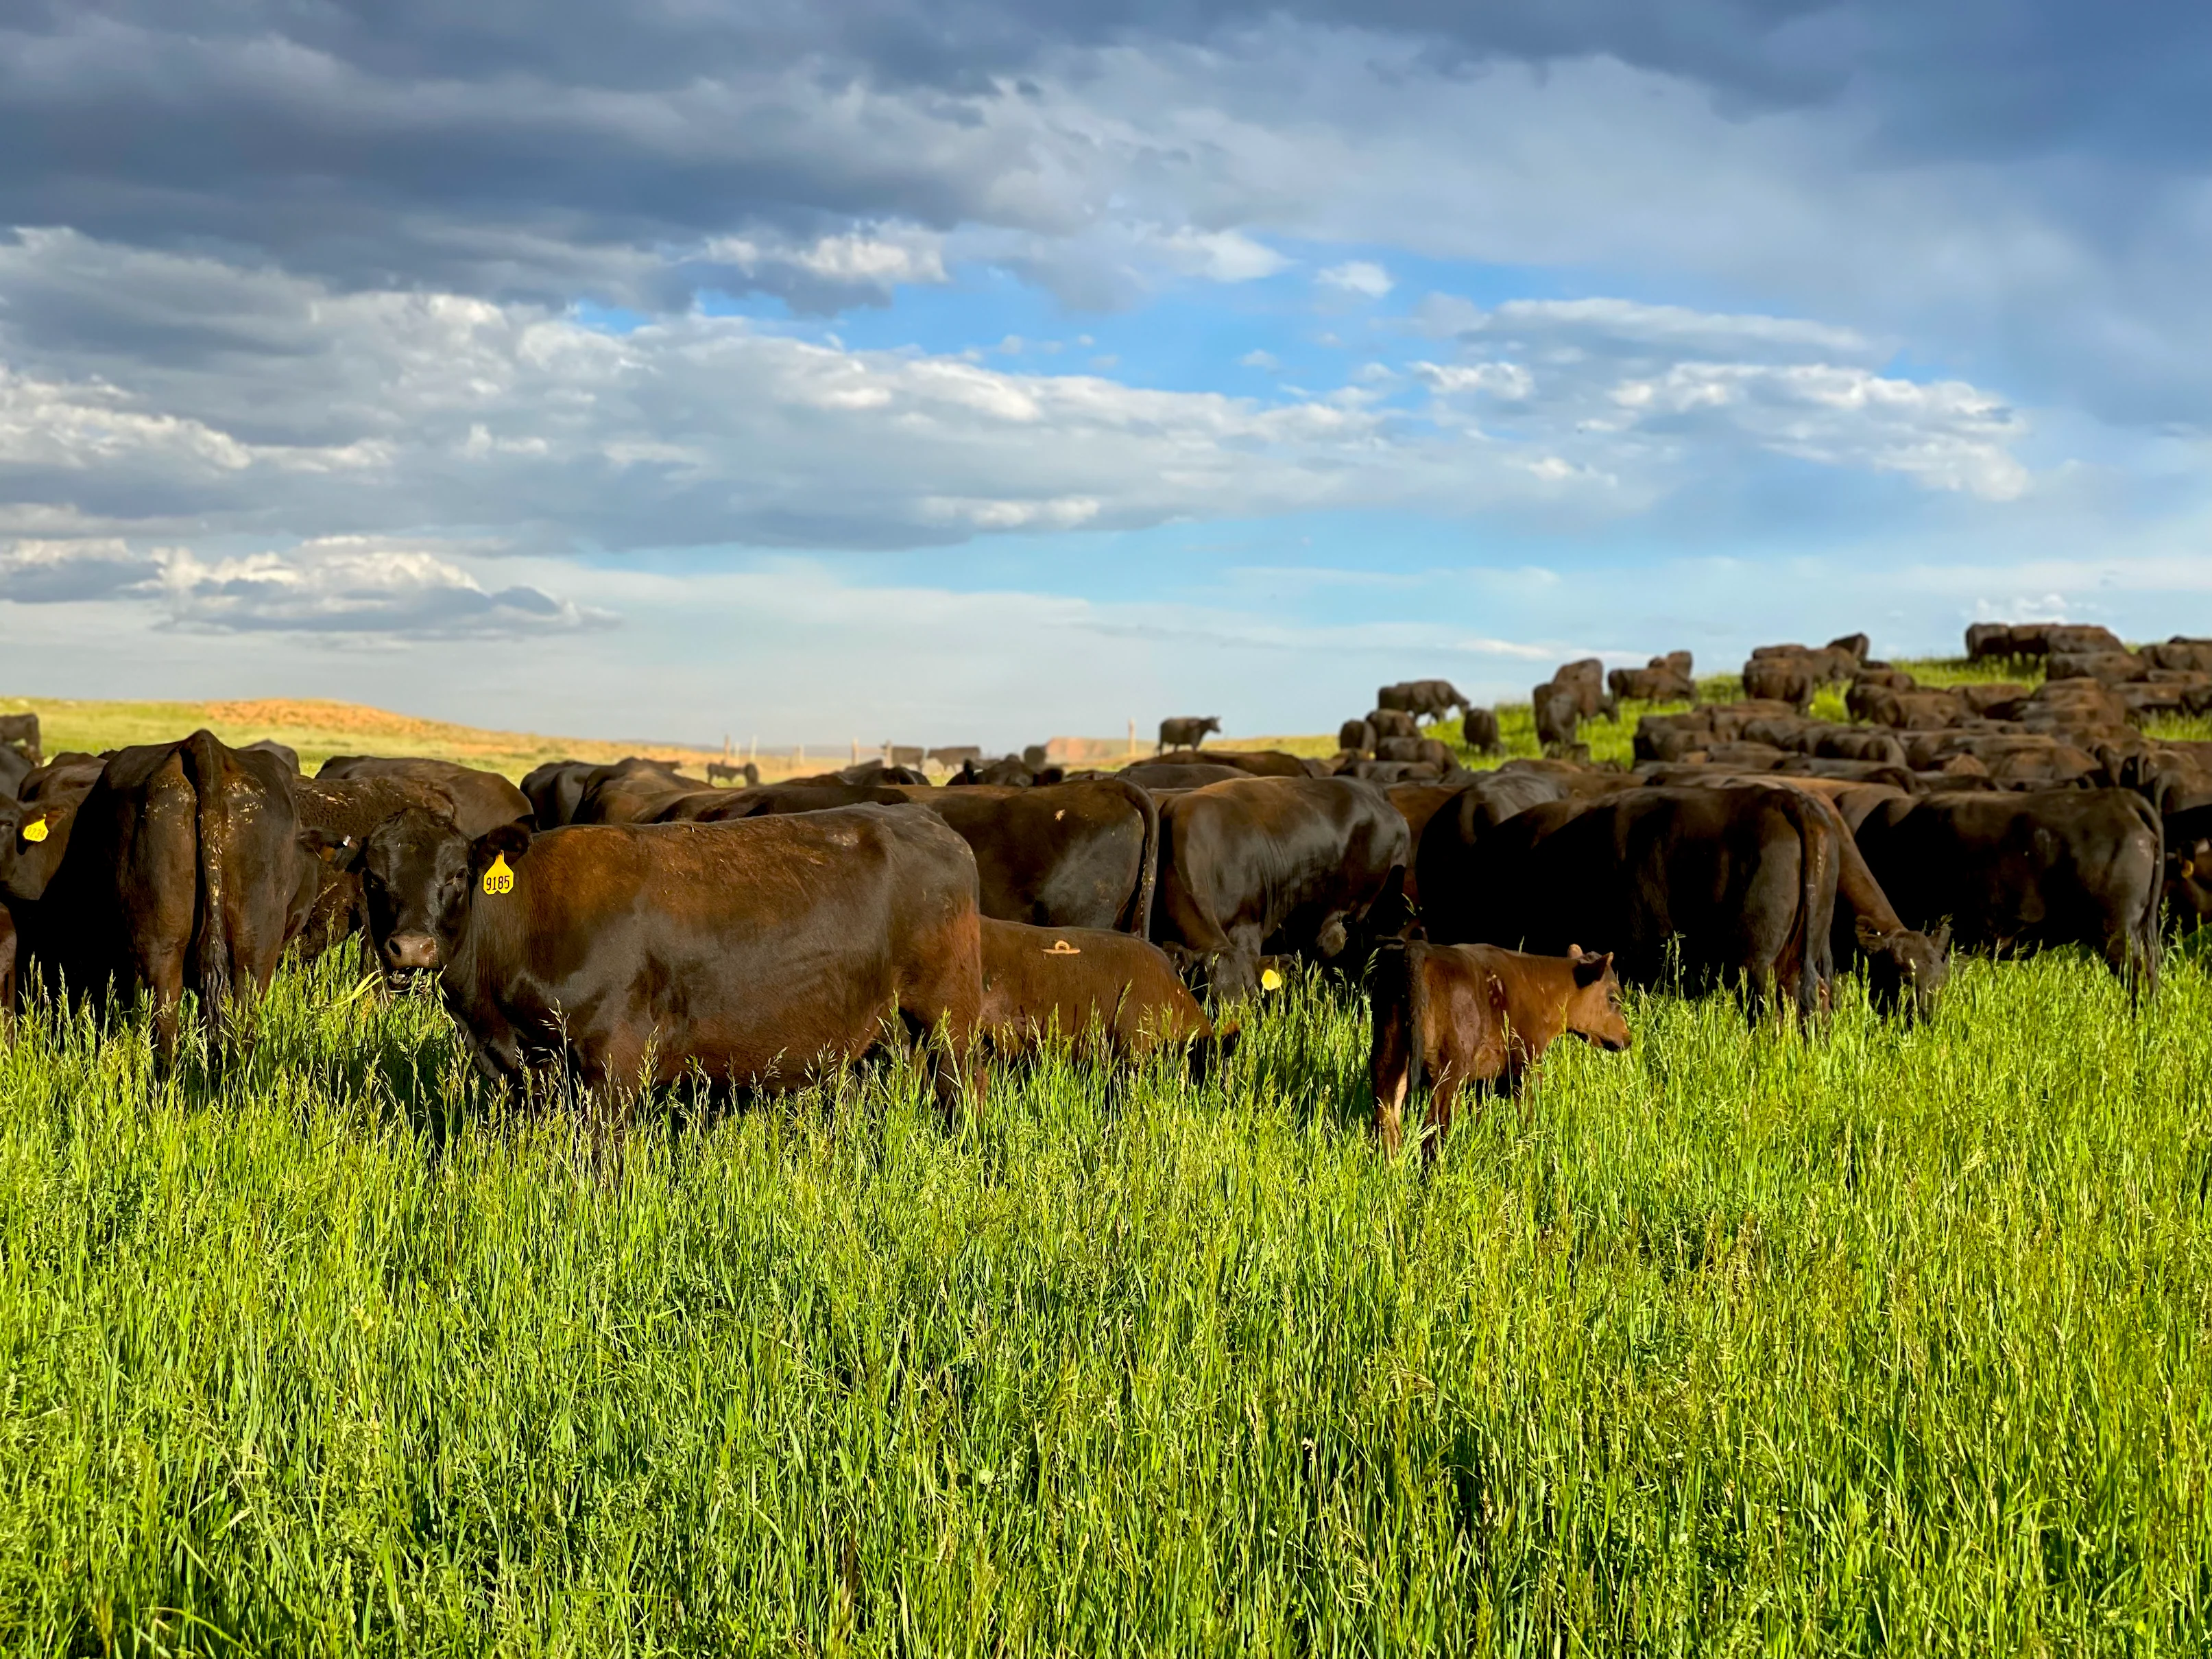 Grass-Fed: The Nutrient-Rich Beef Option